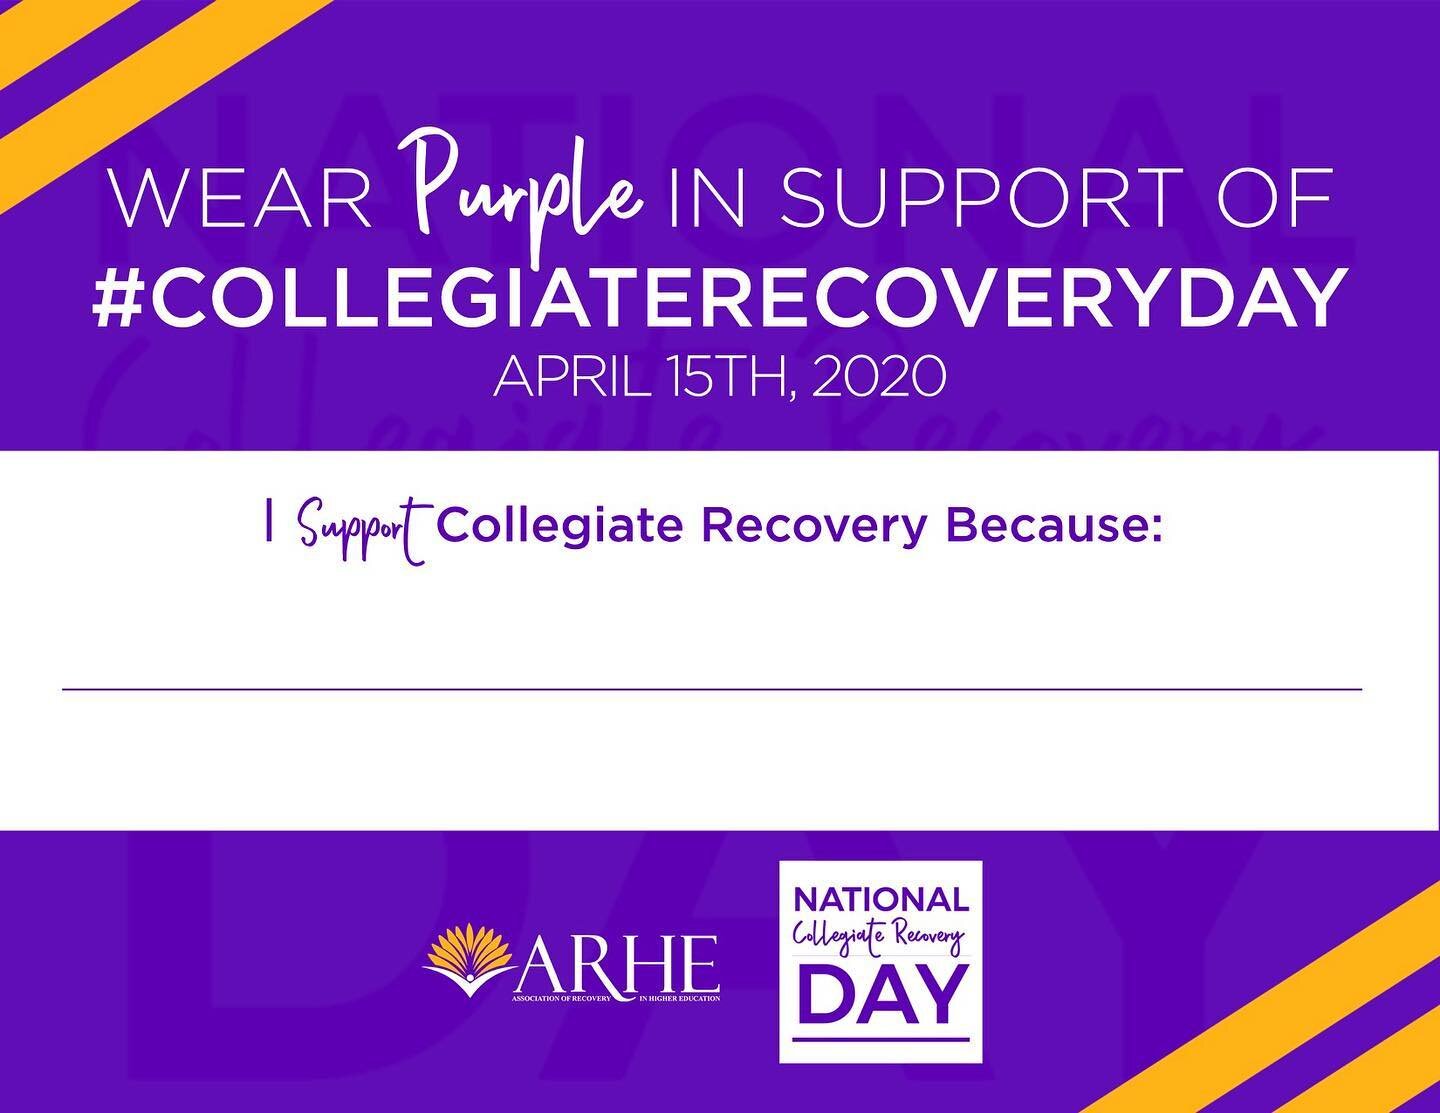 Collegiate recovery is important. Every person in recovery deserves an education and the support to achieve their dreams. Let&rsquo;s remove barriers and help! Tell us why you support #collegiaterecoveryday To support this cause, head over to @colleg